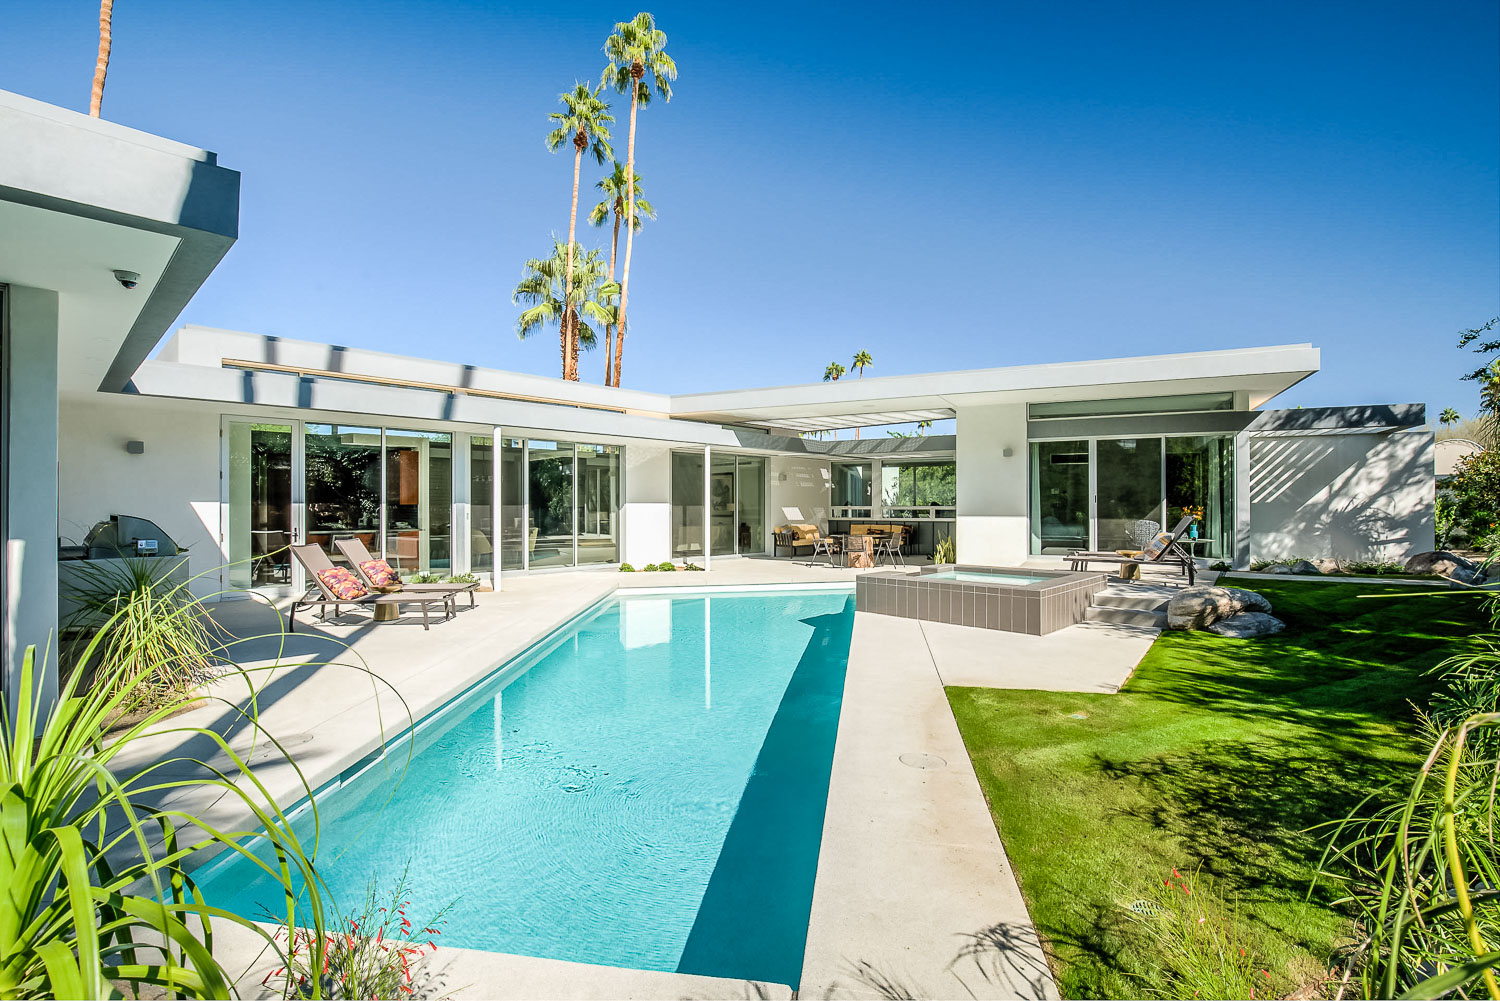 Stay at these Palm Springs luxury villas during Coachella Festival and be cool